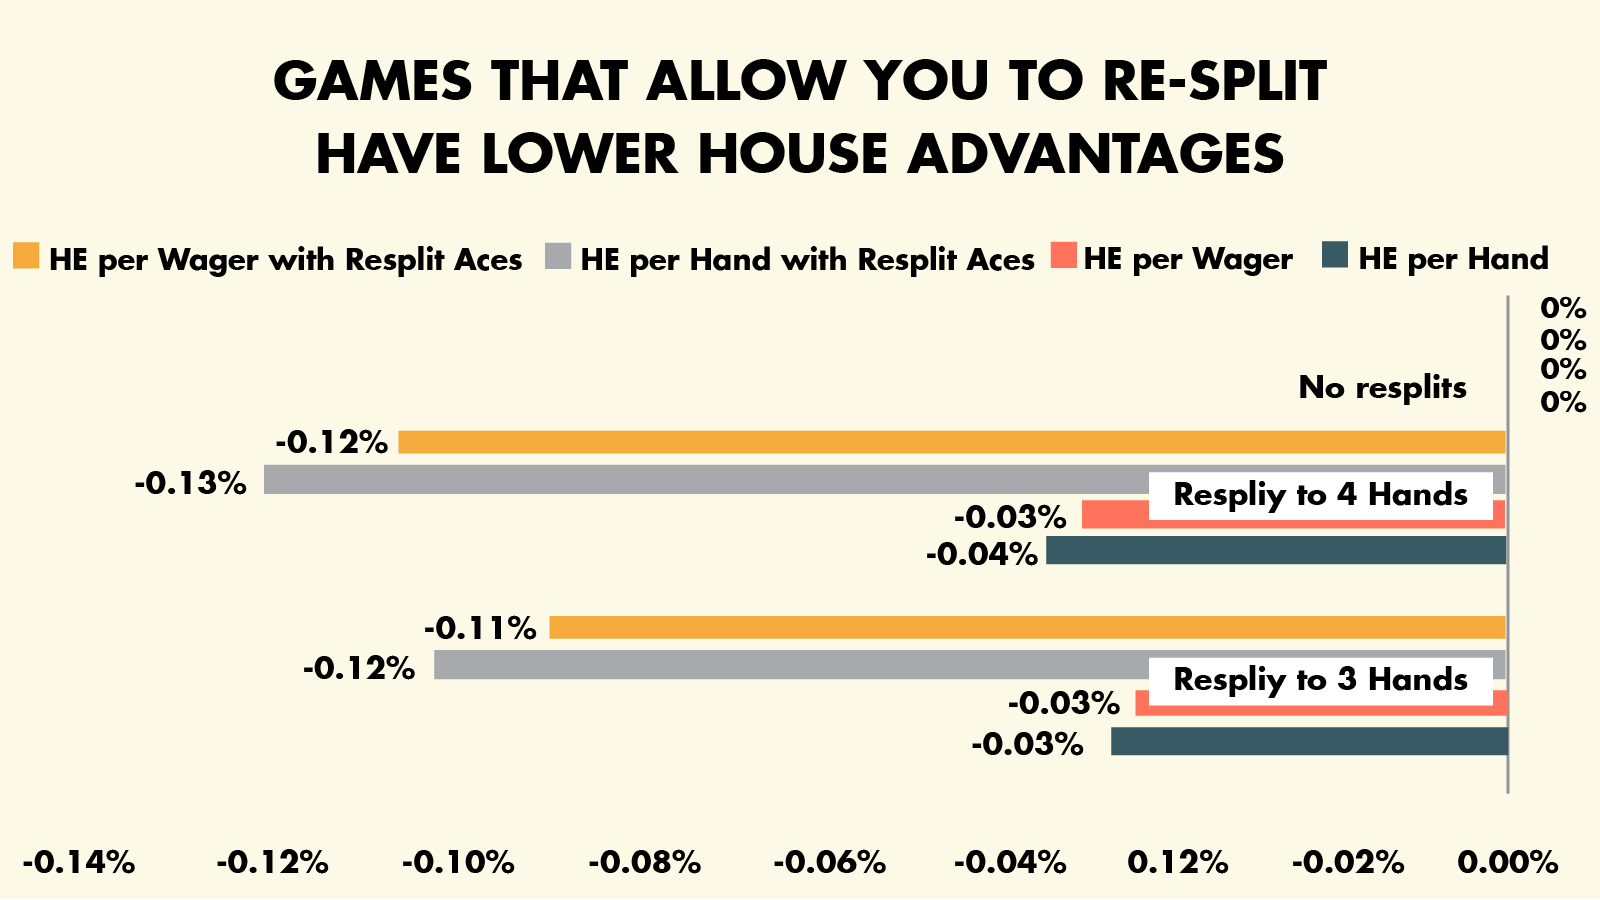 Resplit Rules and Their Effects